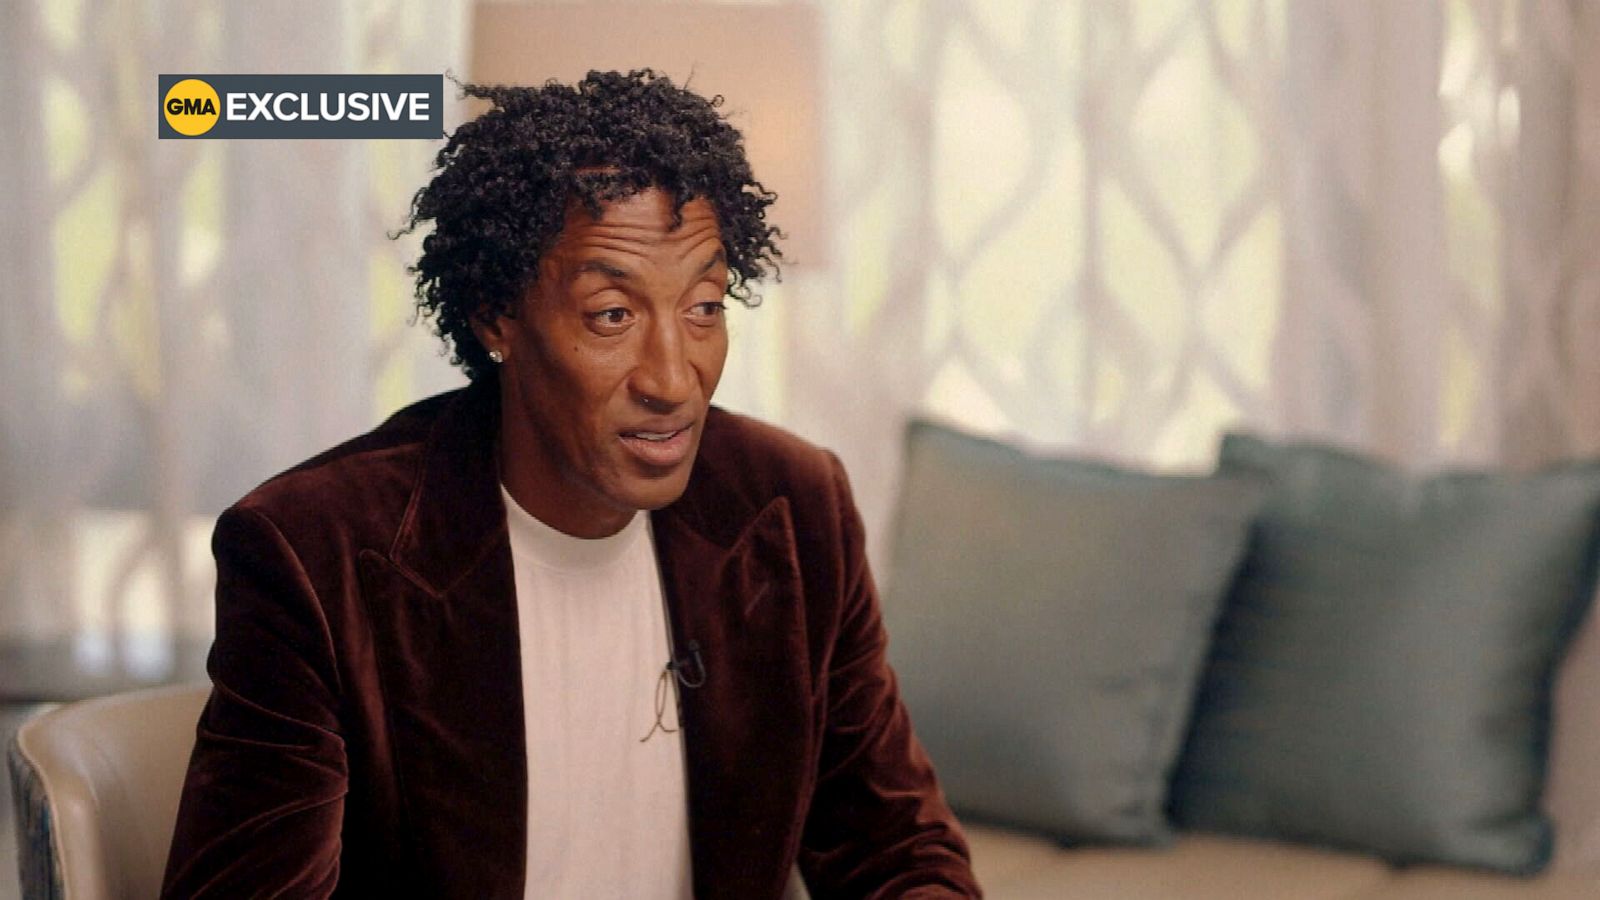 Scottie Pippen on relationship with Michael Jordan: 'Our friendship is not  where people see it on TV